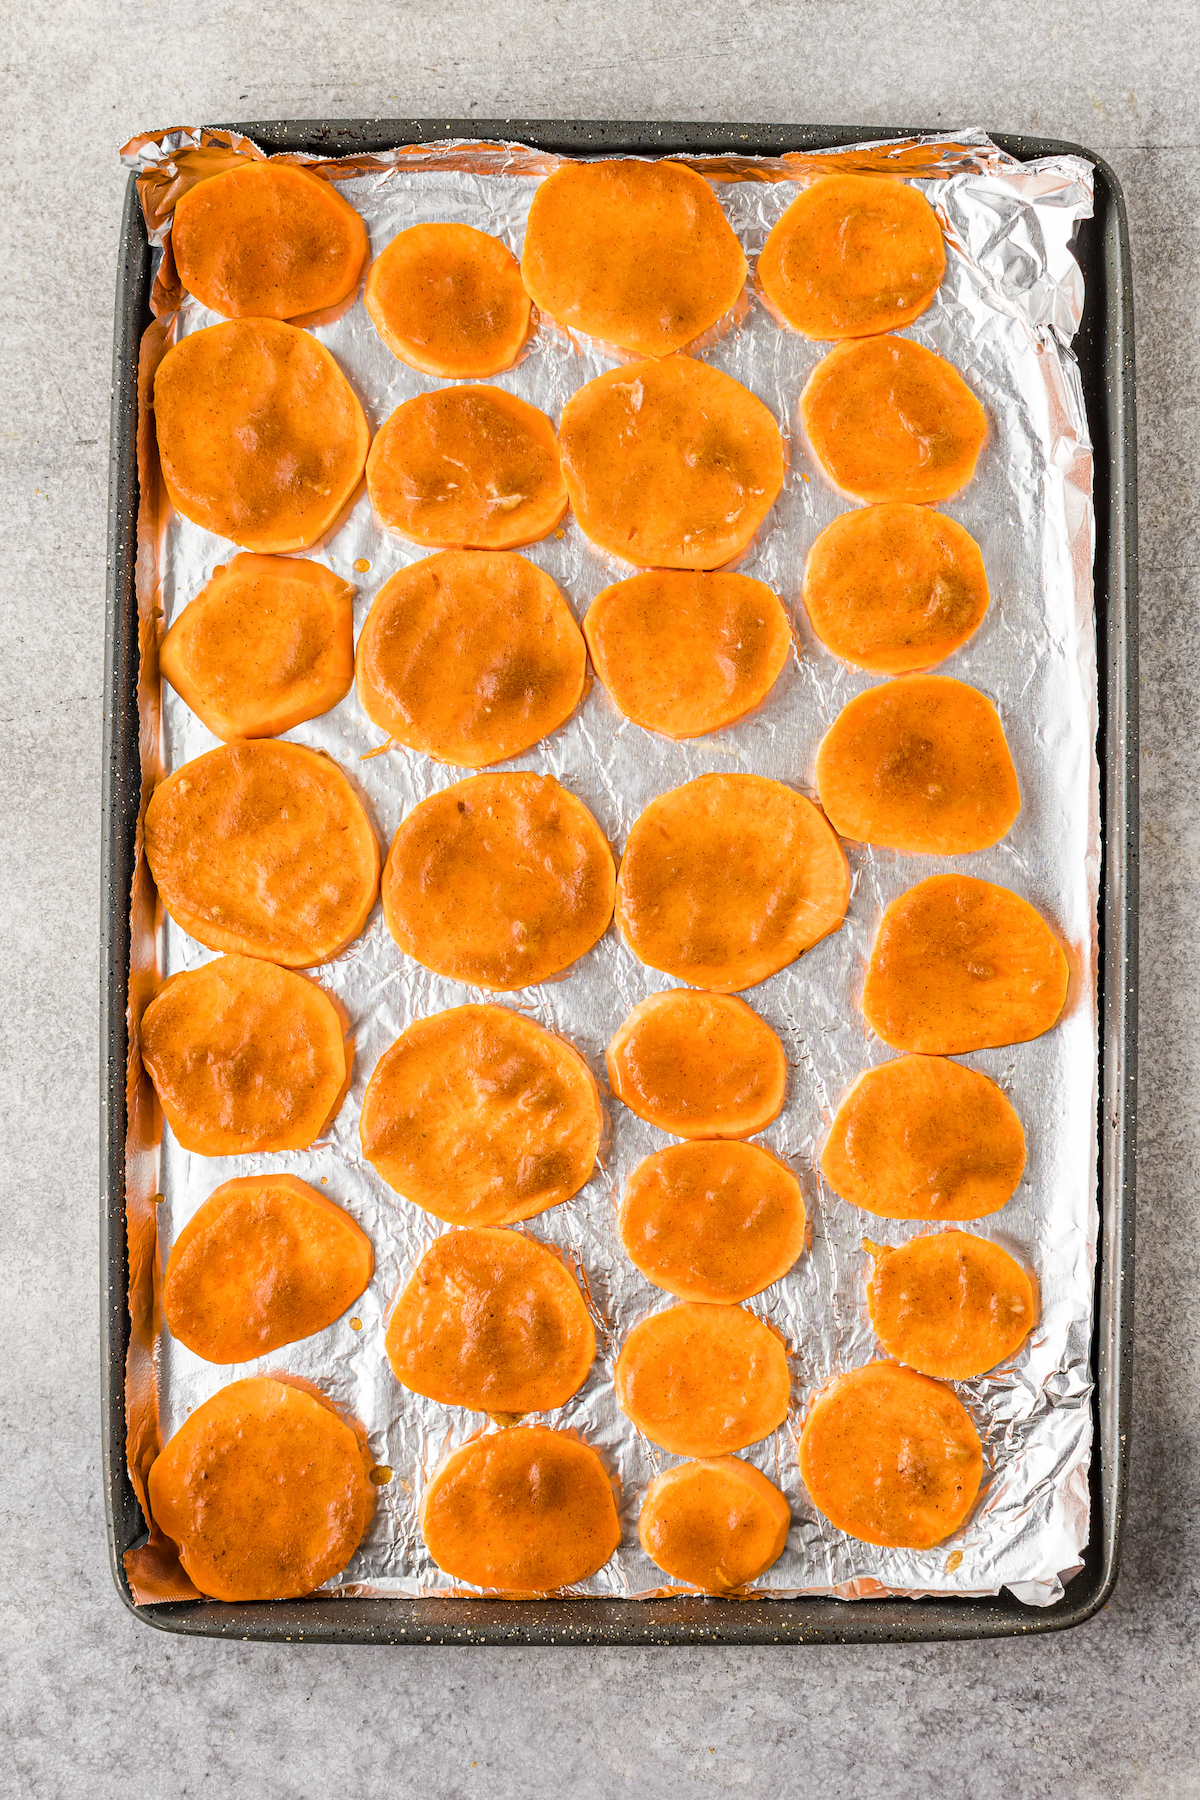 All sweet potato slices with butter-sugar mixture, before baking.